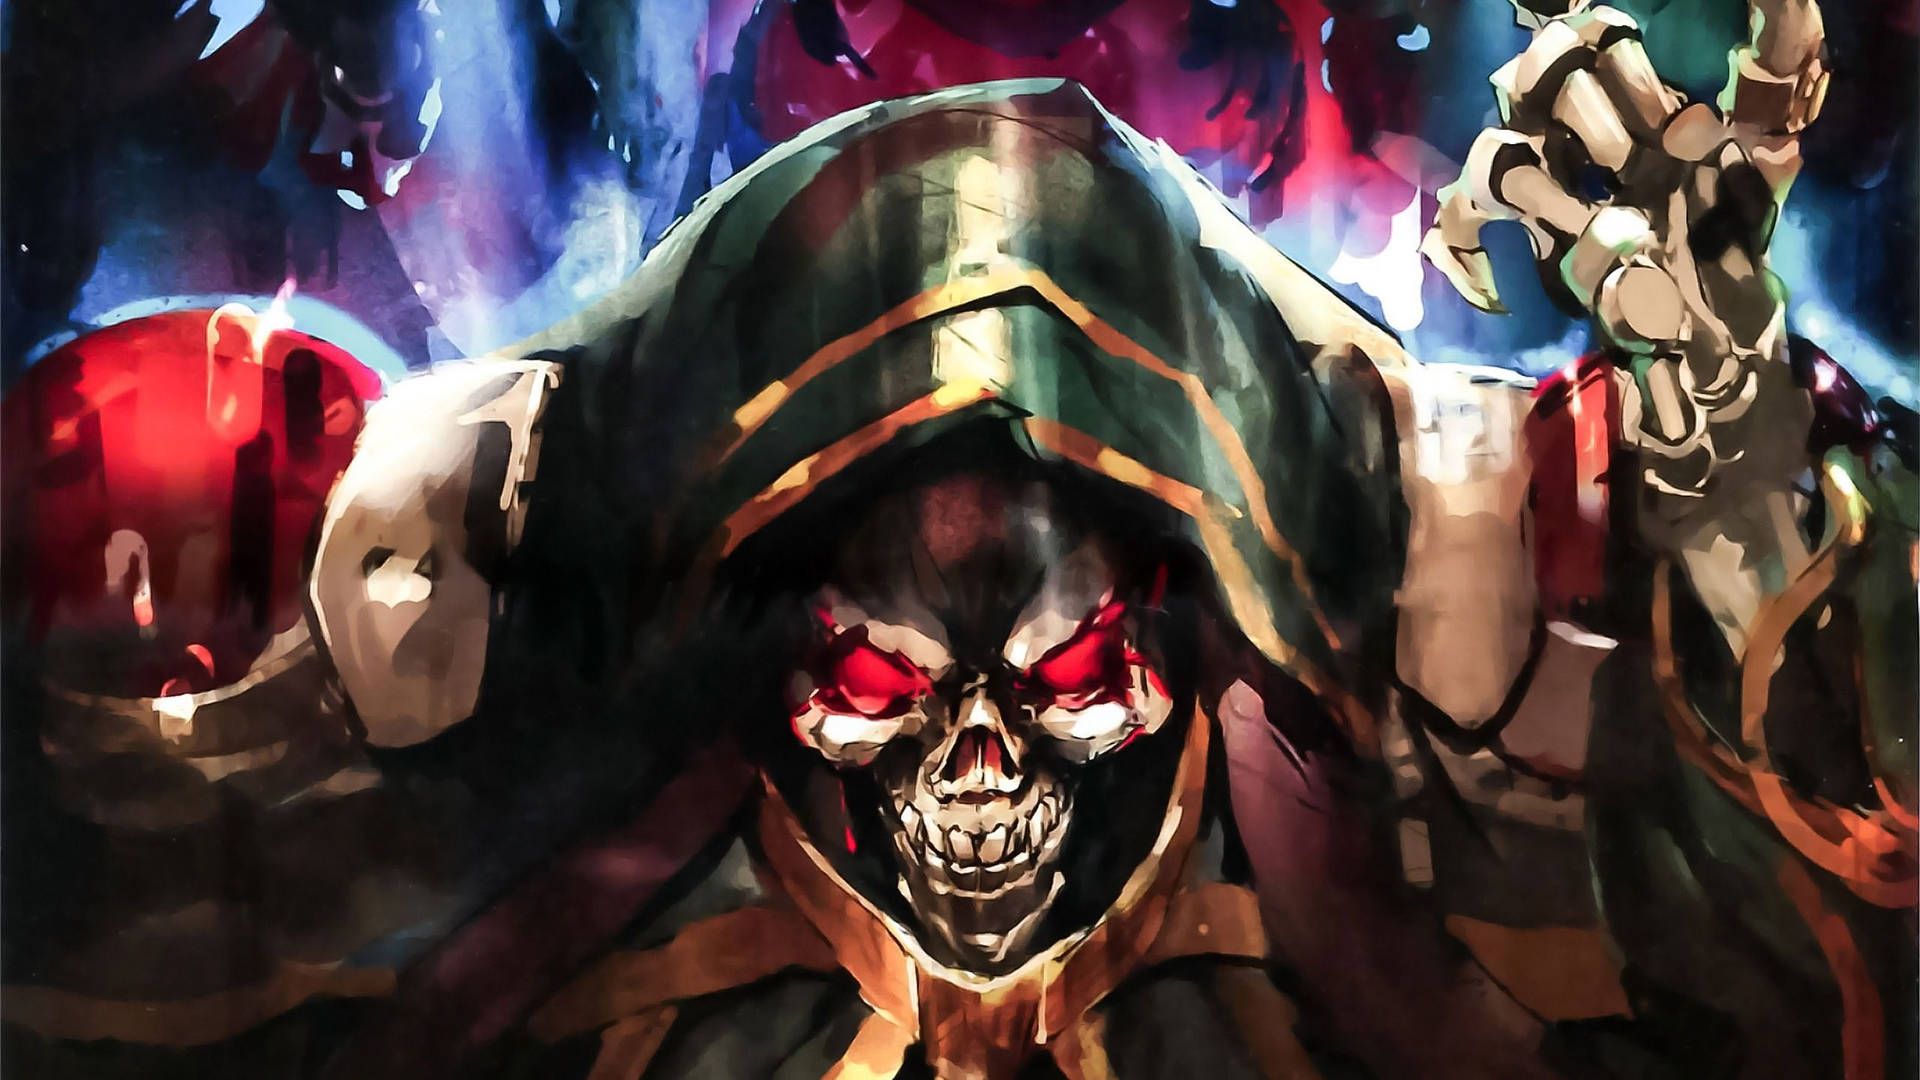 Hd Pastel Art Of Ainz Ooal Gown Overlord Background